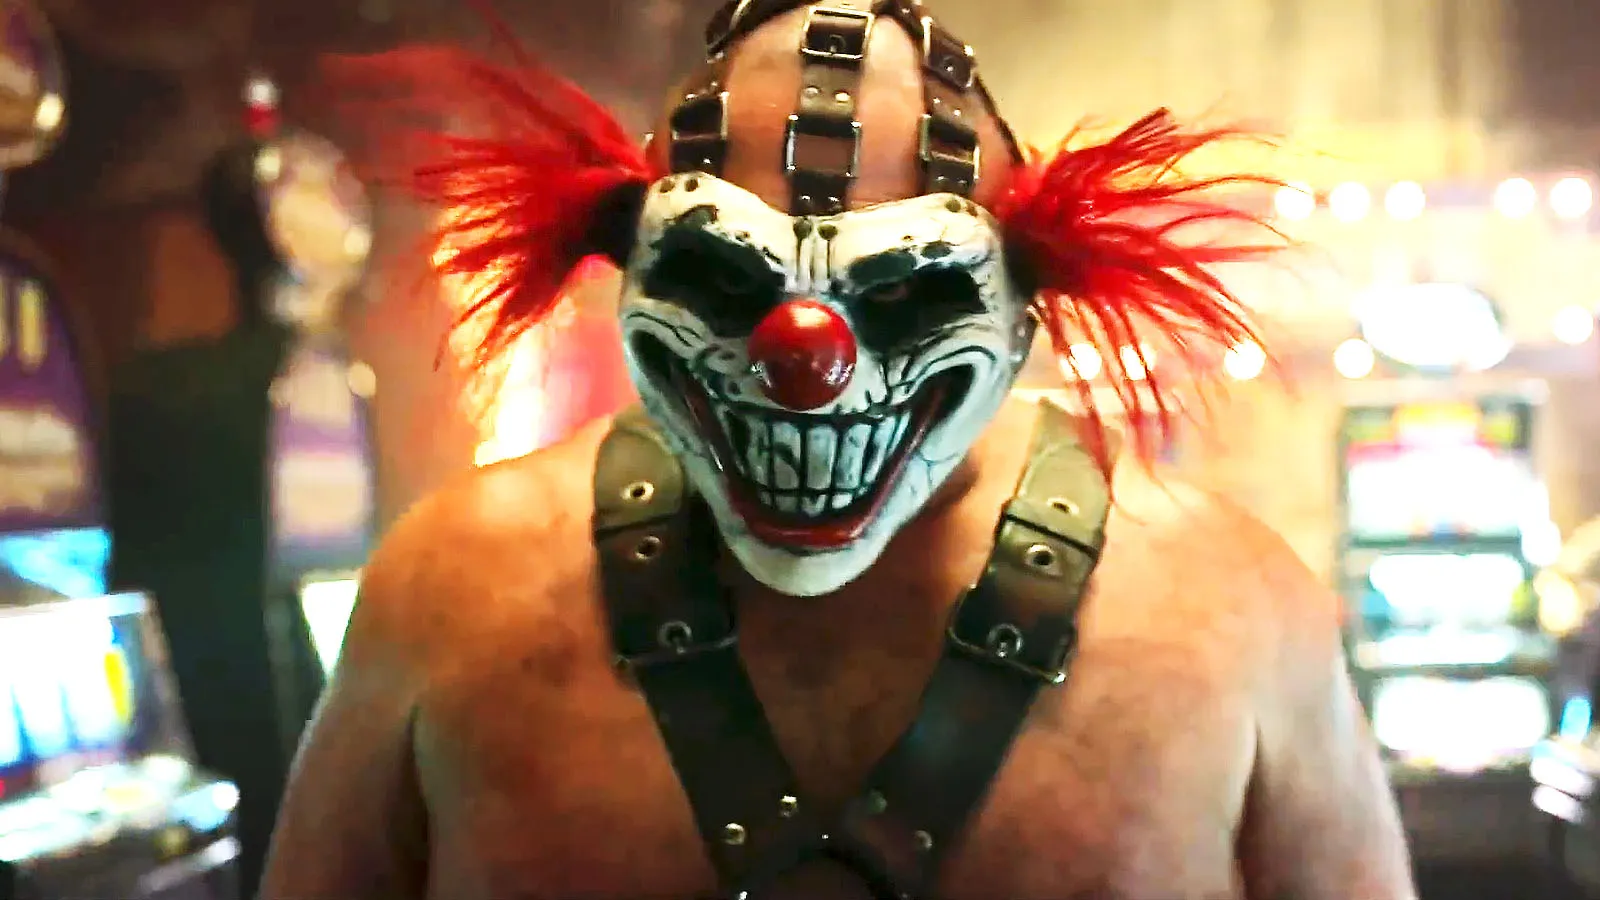 The First Look at Twisted Metal is here